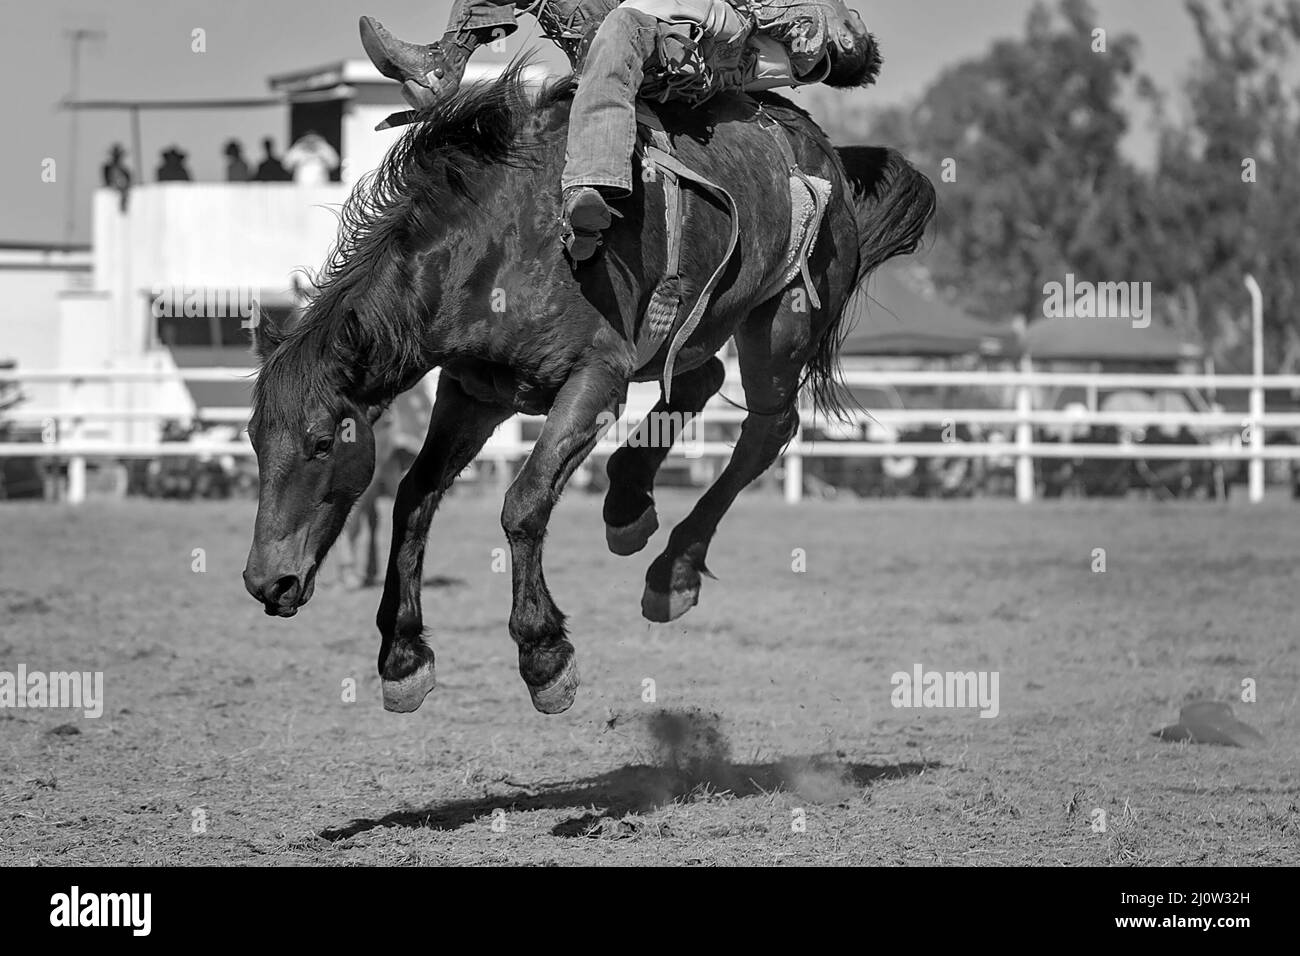 Cowboy rides a bucking horse in bareback bronc event at a country rodeo. Stock Photo